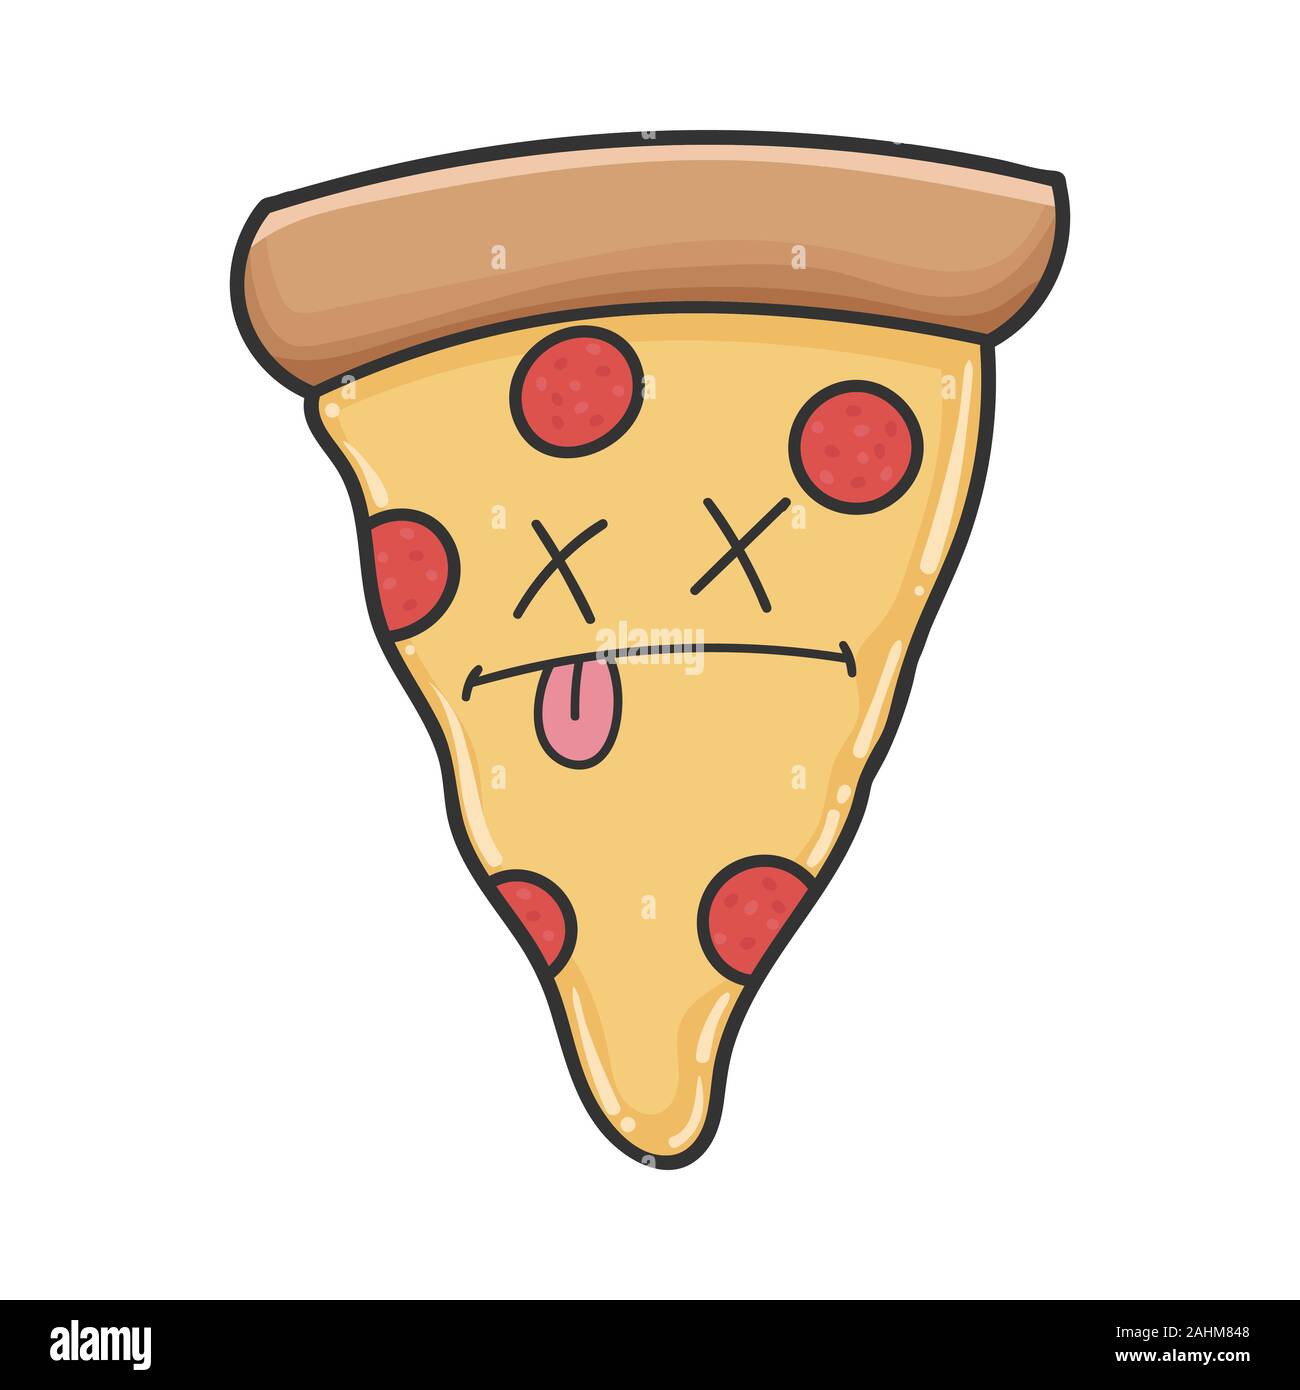 Dead slice of pizza cartoon isolated on white Stock Vector